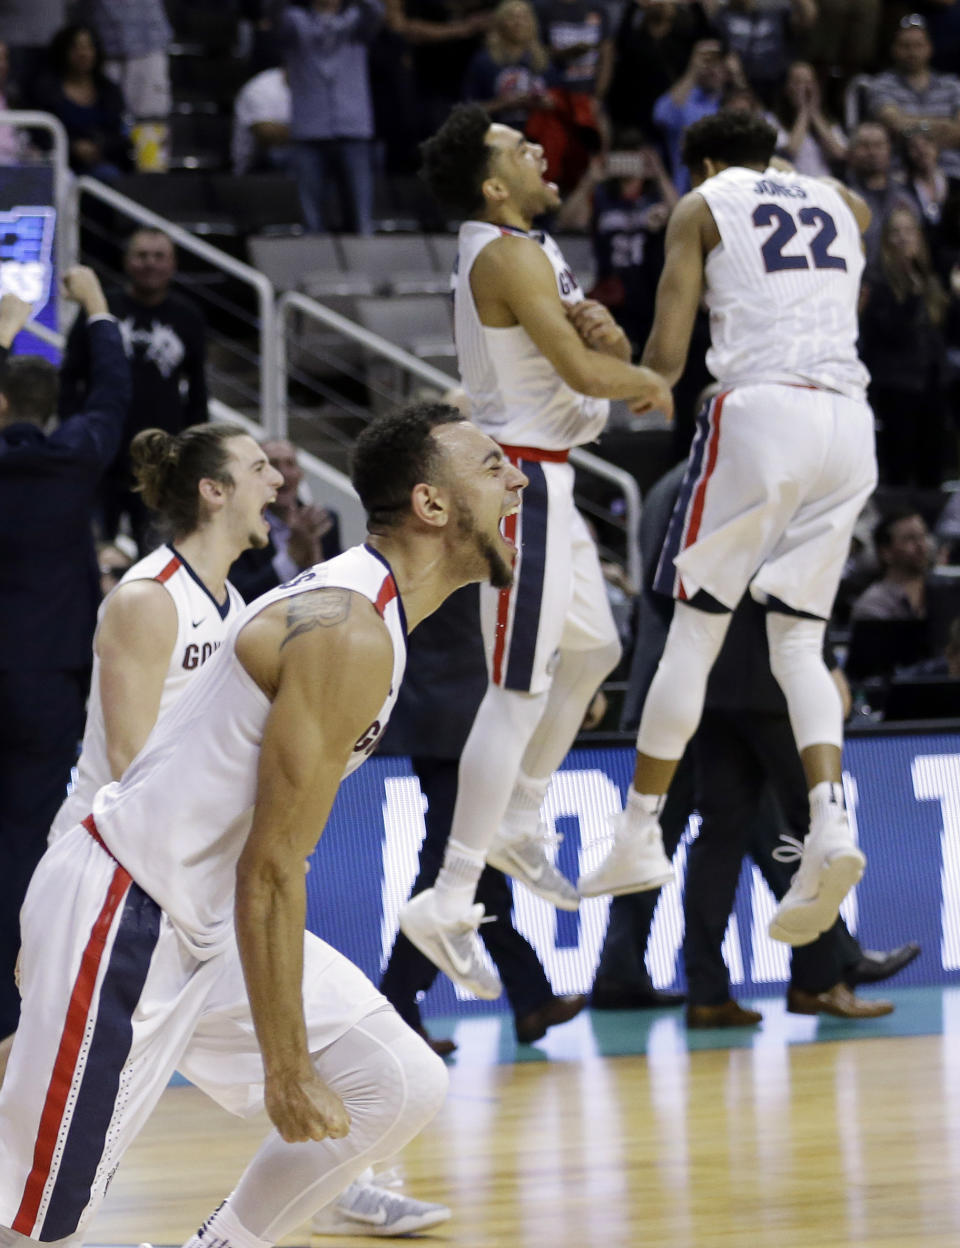 Gonzaga players celebrate after a win over Xavier during an NCAA Tournament college basketball regional final game Saturday, March 25, 2017, in San Jose, Calif. (AP Photo/Ben Margot)